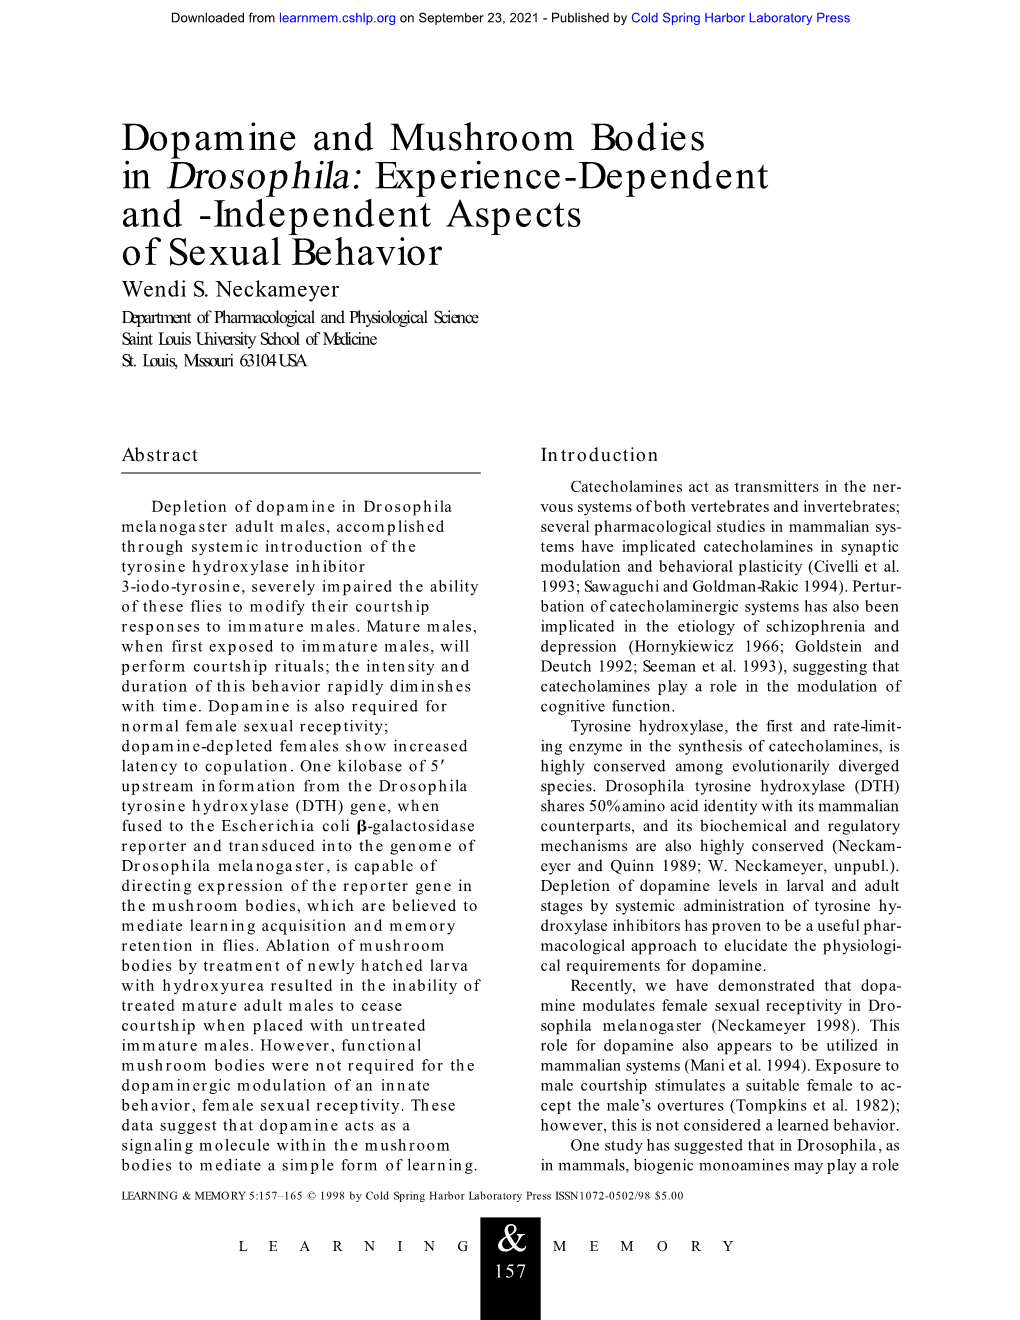 Dopamine and Mushroom Bodies in Drosophila: Experience-Dependent and -Independent Aspects of Sexual Behavior Wendi S